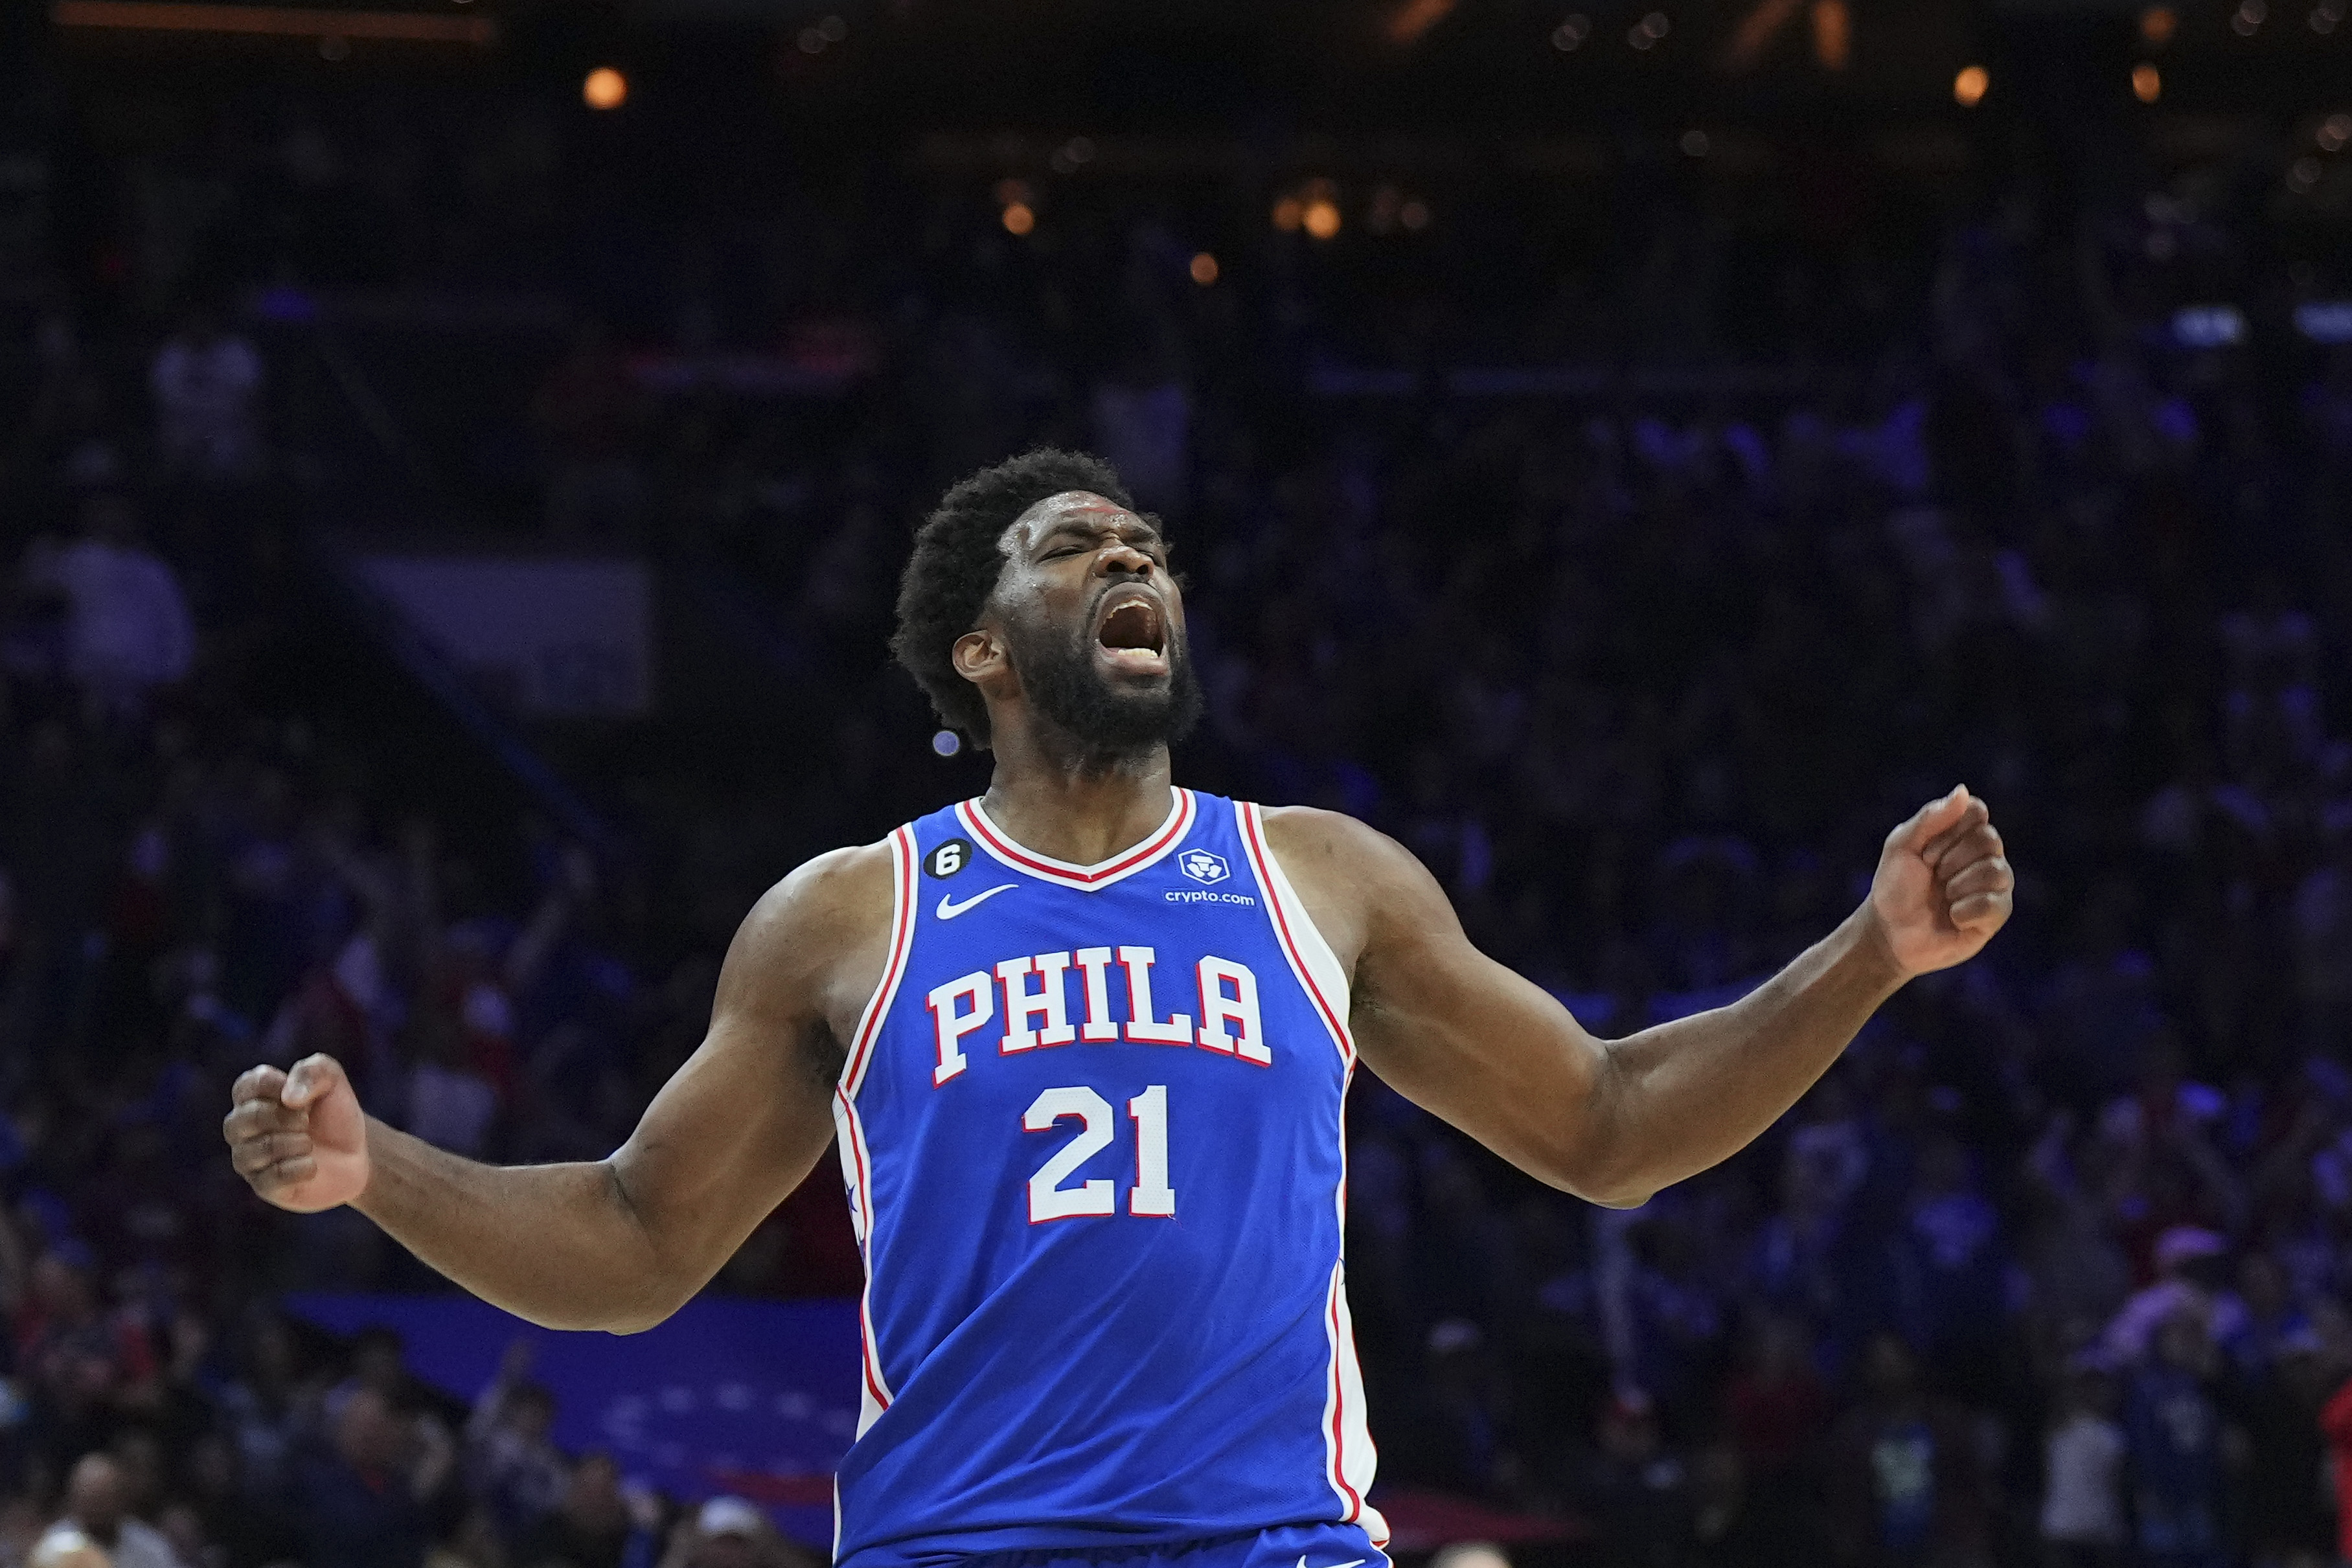 Sixers: Tyrese Maxey's NBA debut was full of electricity